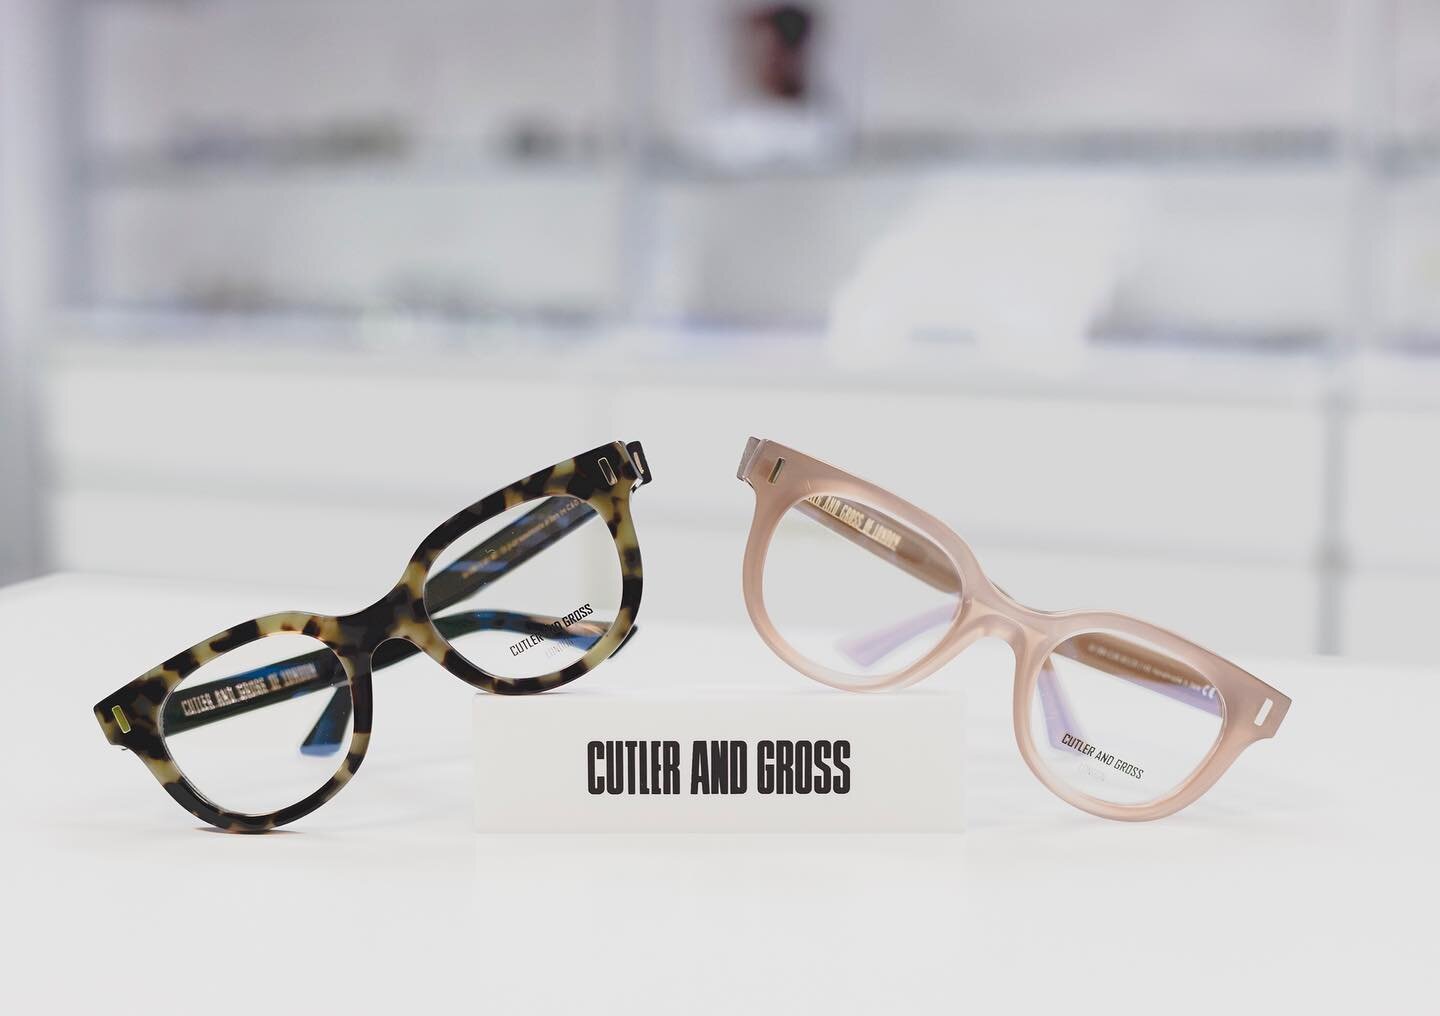 The CUTLER AND GROSS // 1346 offers an oversized acetate square frame with newly designed temples and a patterned temple core exclusive to Cutler and Gross. We absolutely love these unique Cutler colours! &bull;
&bull;
&bull;
#Falmouth #cornwall #opt